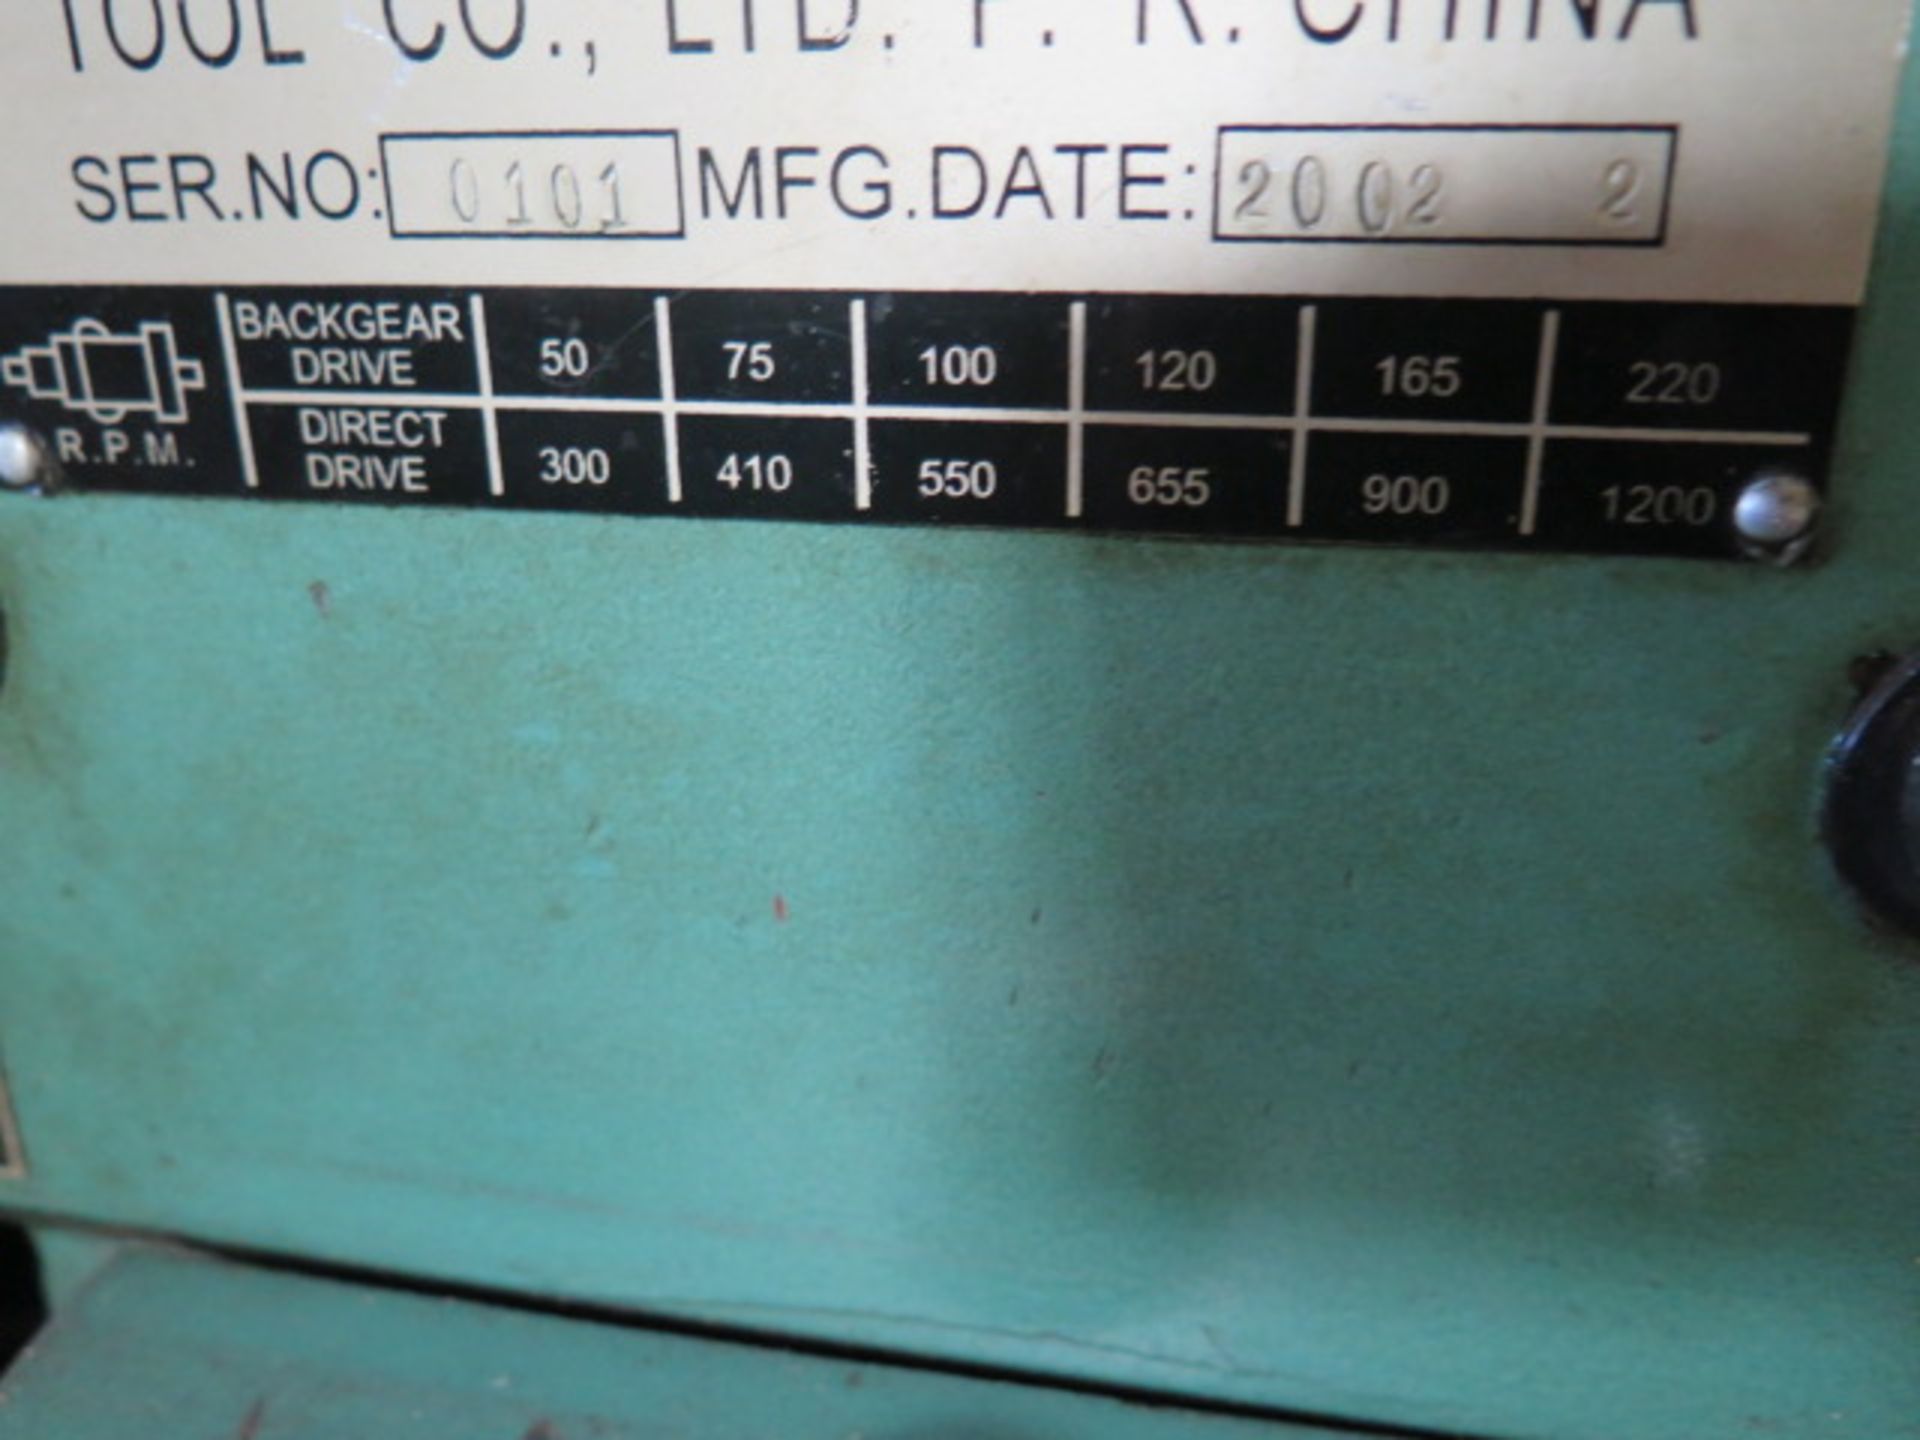 Chizhou mdl. CZ300 11 ½” x 24” Lathe s/n 0101 w/ 50-1200 RPM, Inch/mm Thread, Tailstock, SOLD AS IS - Image 6 of 12